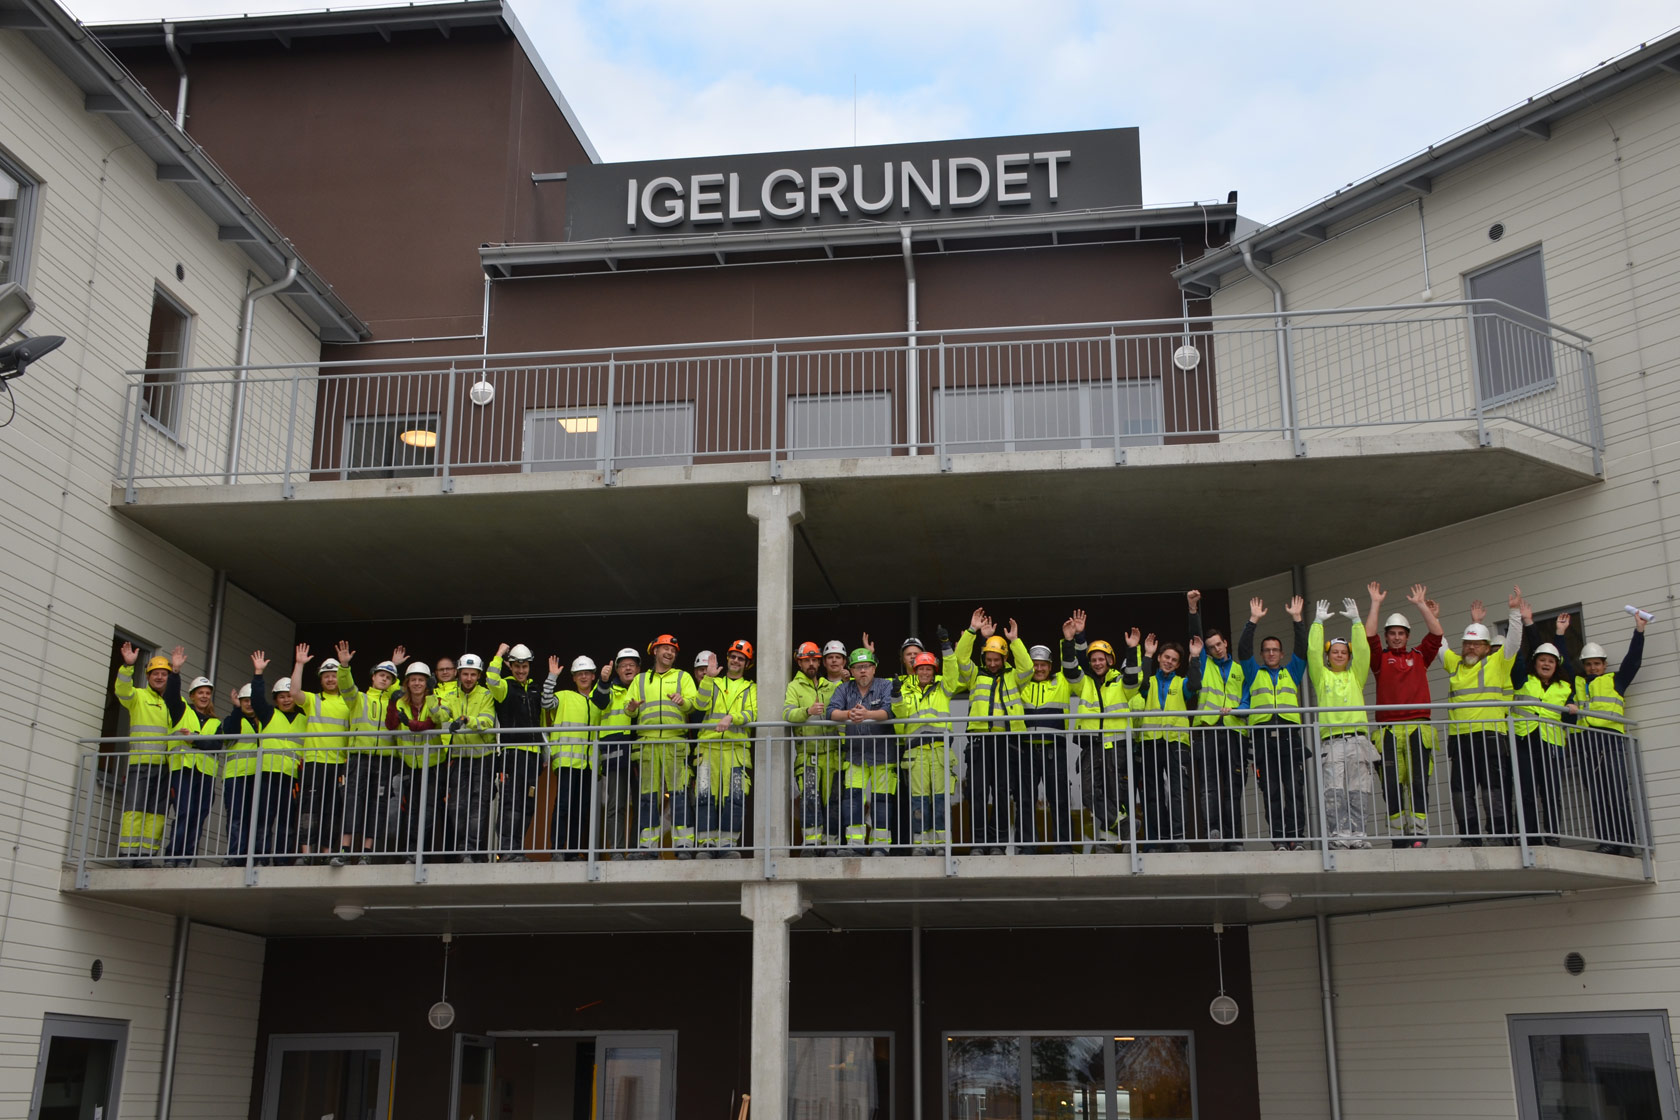 A group of contractors waving from the staff accommodation Igelgrundet at Forsmark